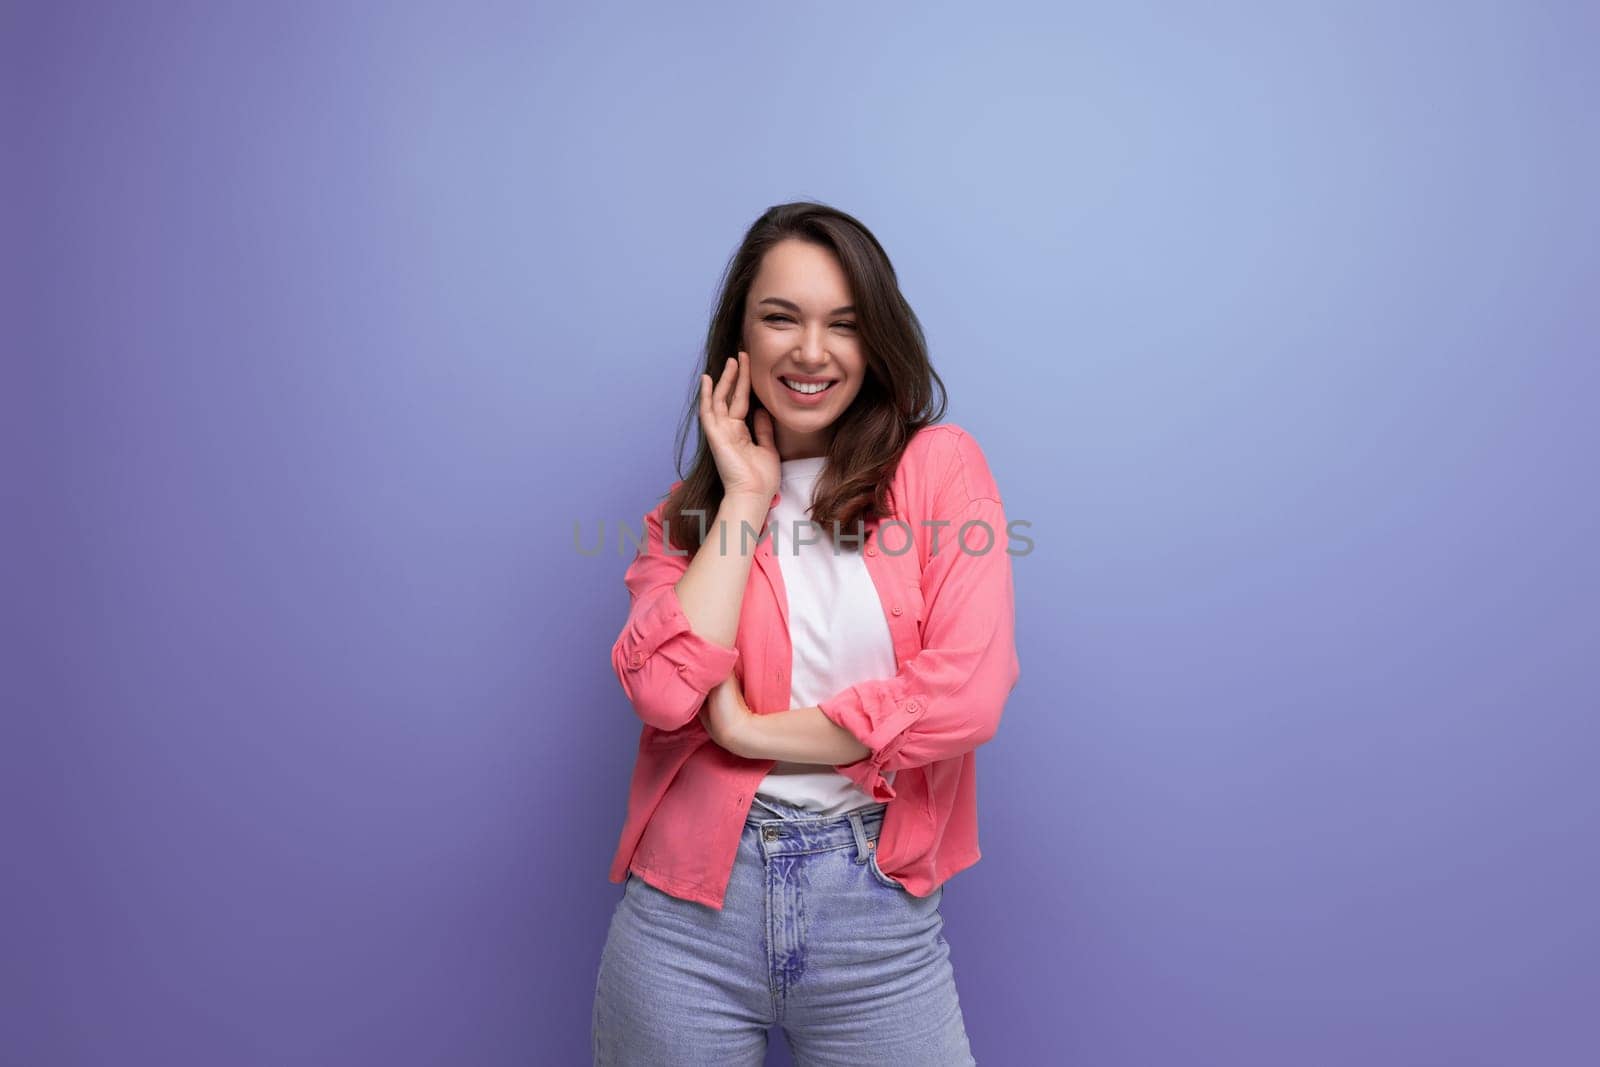 portrait of a brunette woman in a shirt and jeans posing with a smile on a studio background.